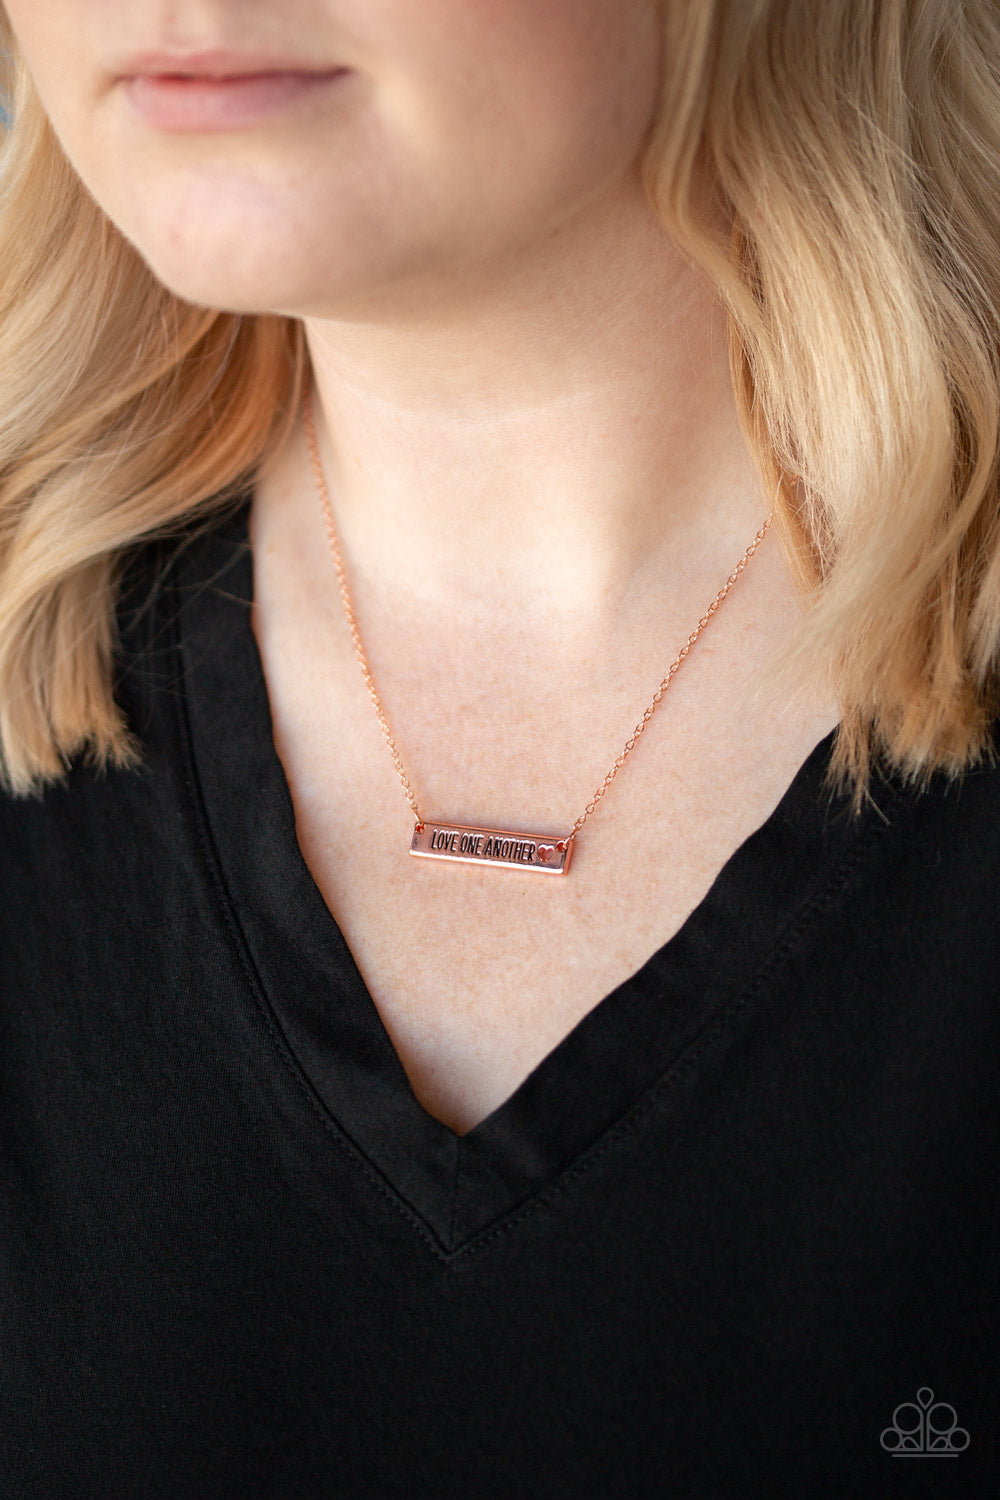 Paparazzi Necklace ~ Love One Another - Copper Inspirational Necklace